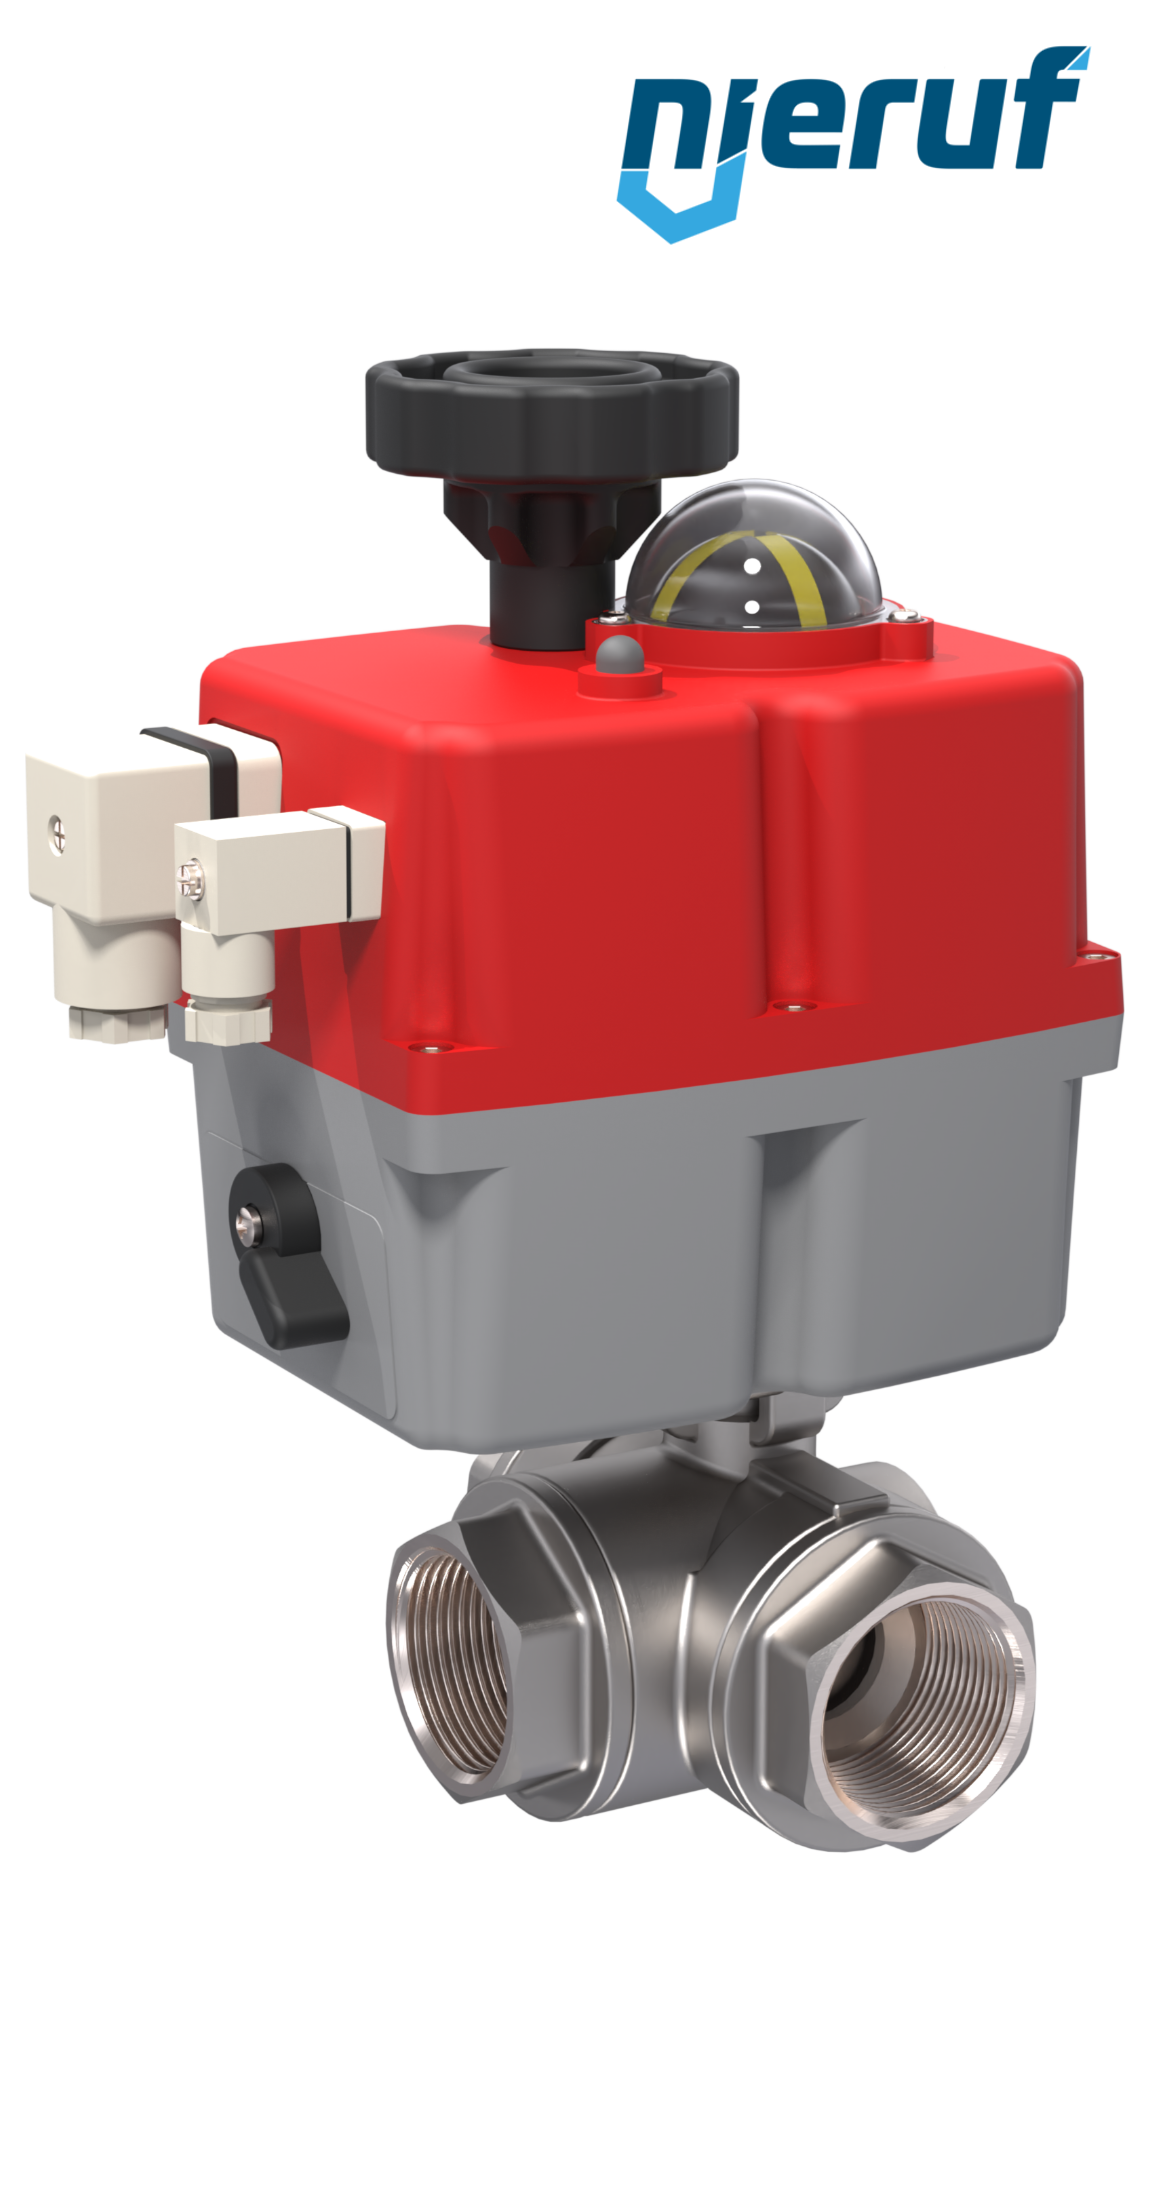 3 way automatic-ball valve 24-240V DN40 - 1 1/2" inch stainless steel reduced port design with T drilling